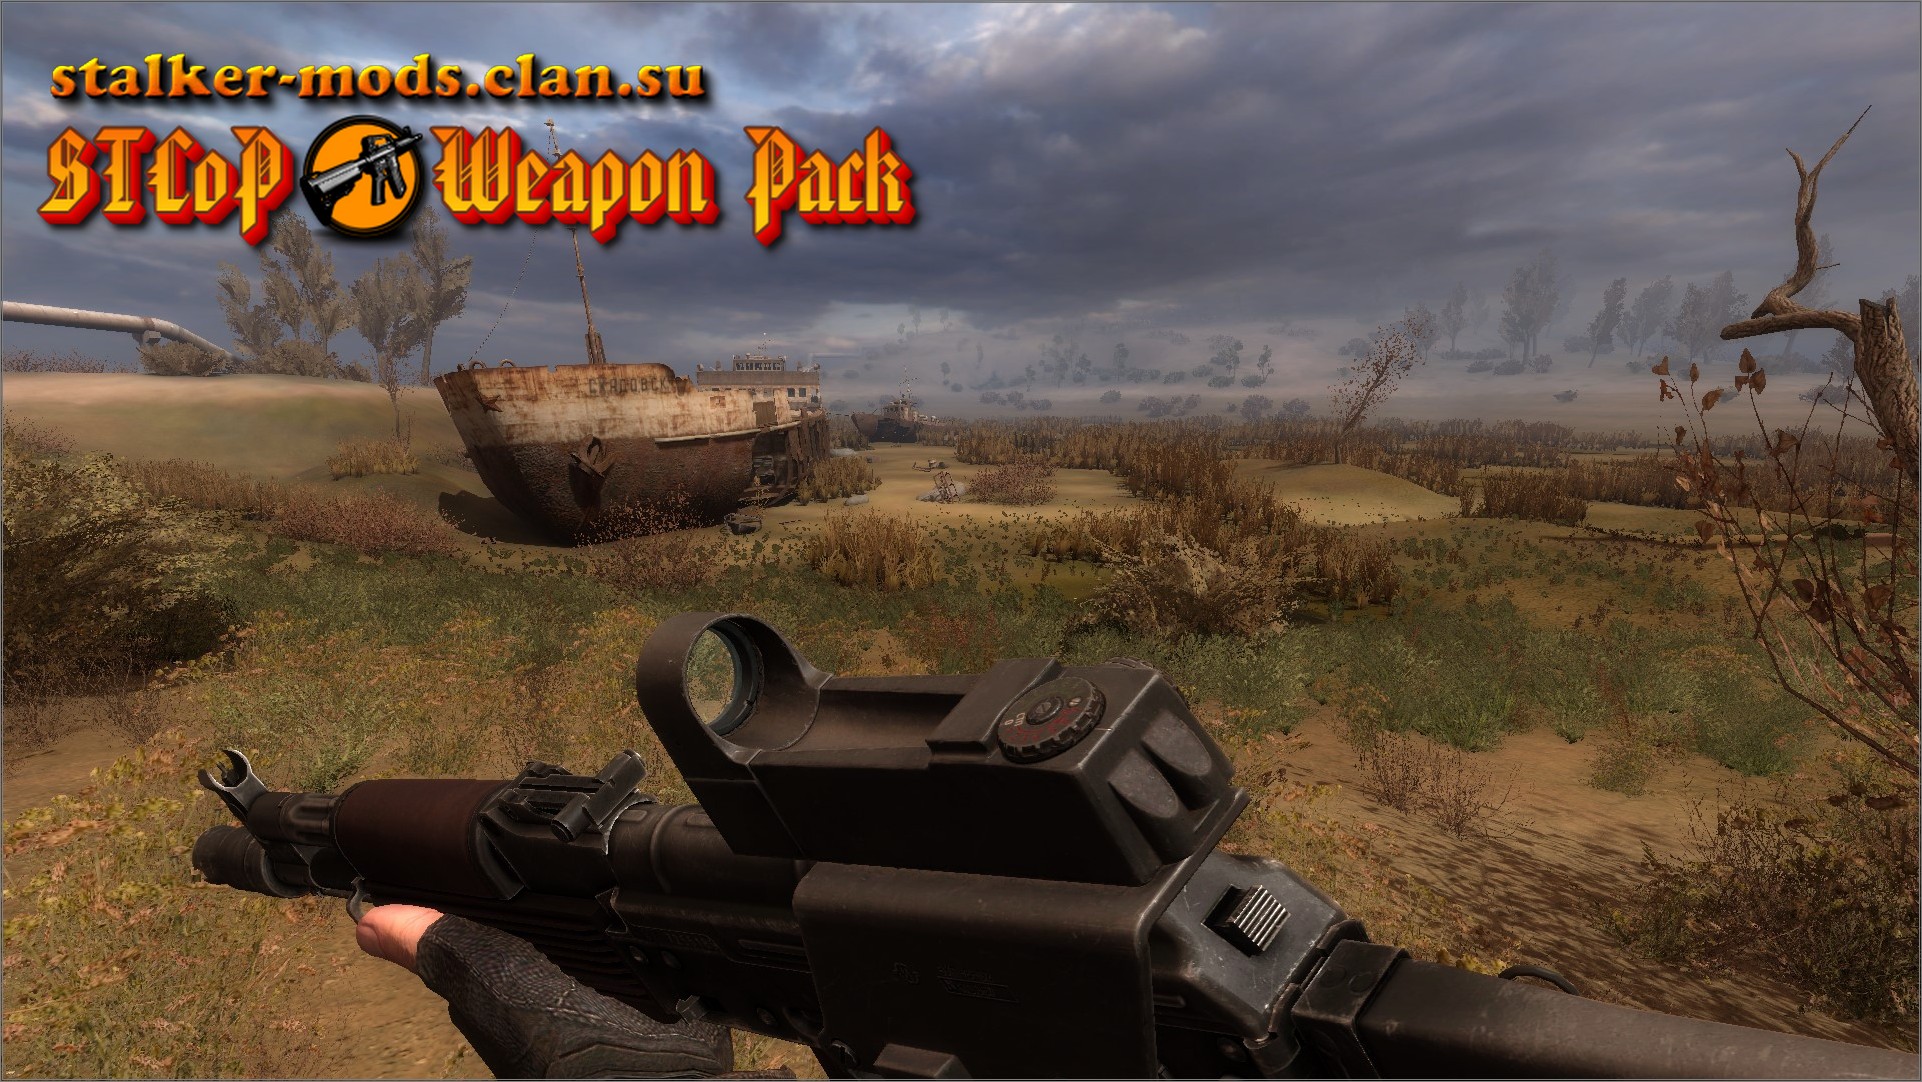 stcop weapon pack 2.8.0.7